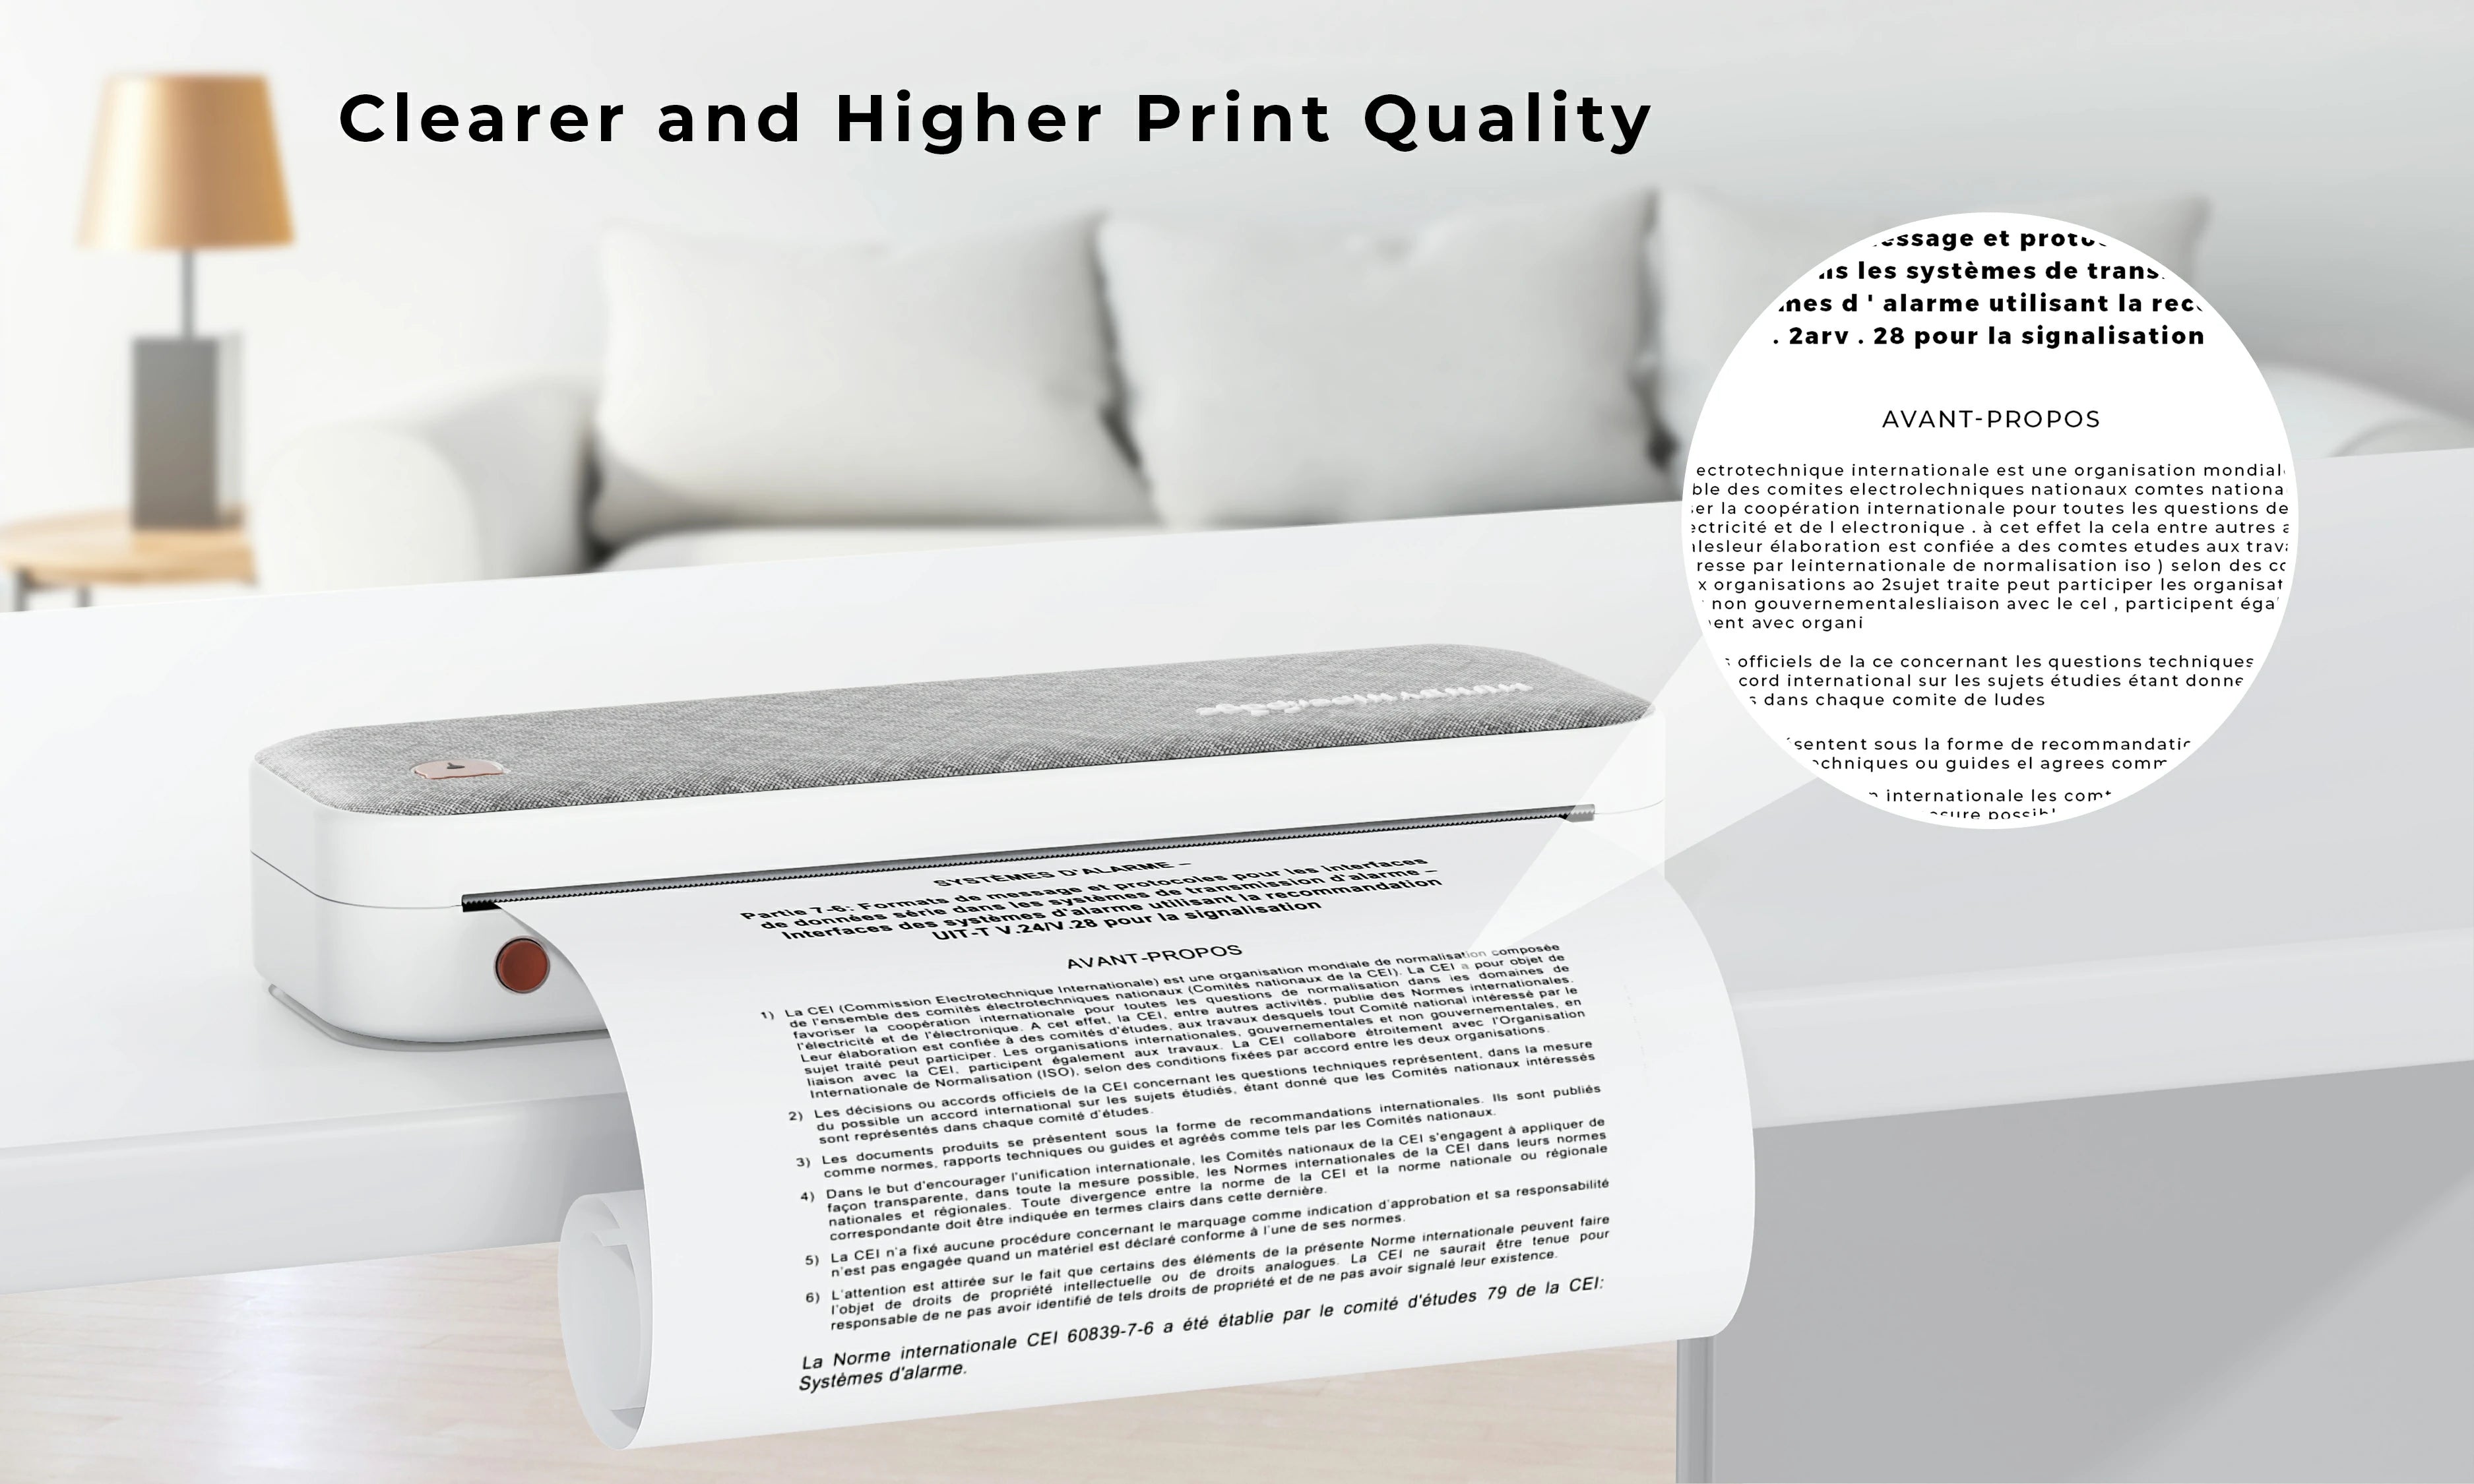 MUNBYN A4 Printer produces high-quality prints with a resolution of 203 dpi.